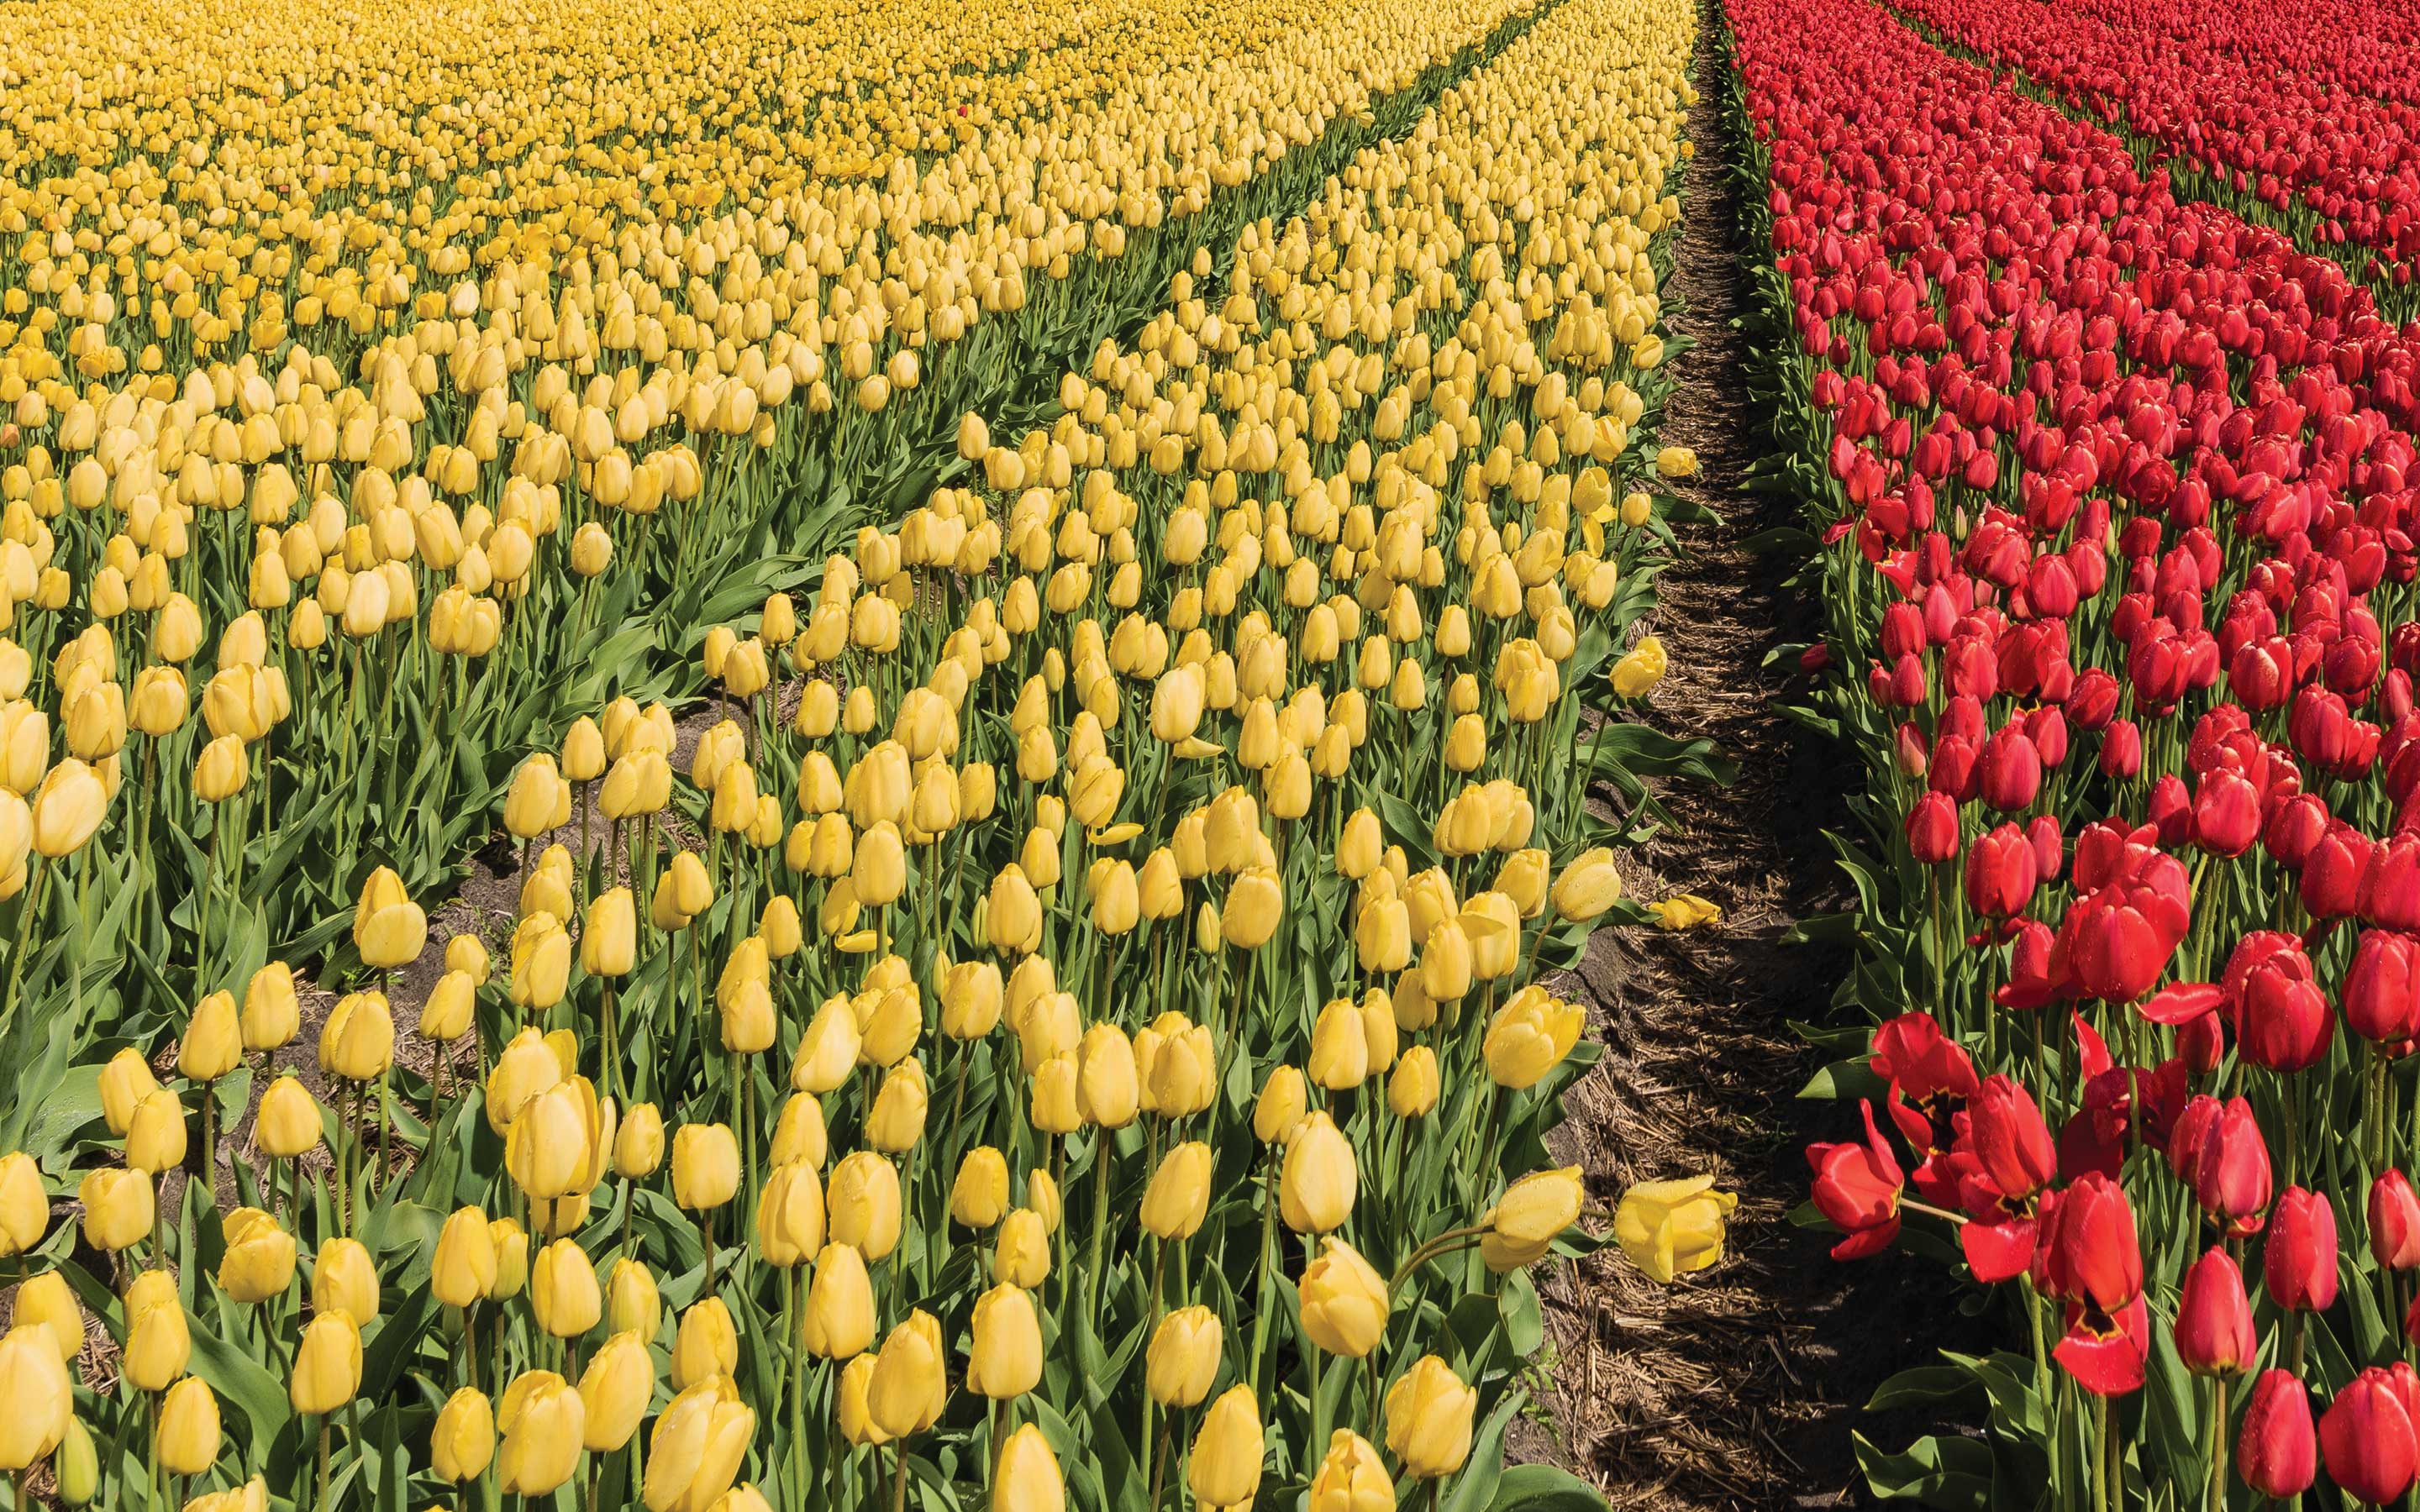 A field of yellow and red tulips.